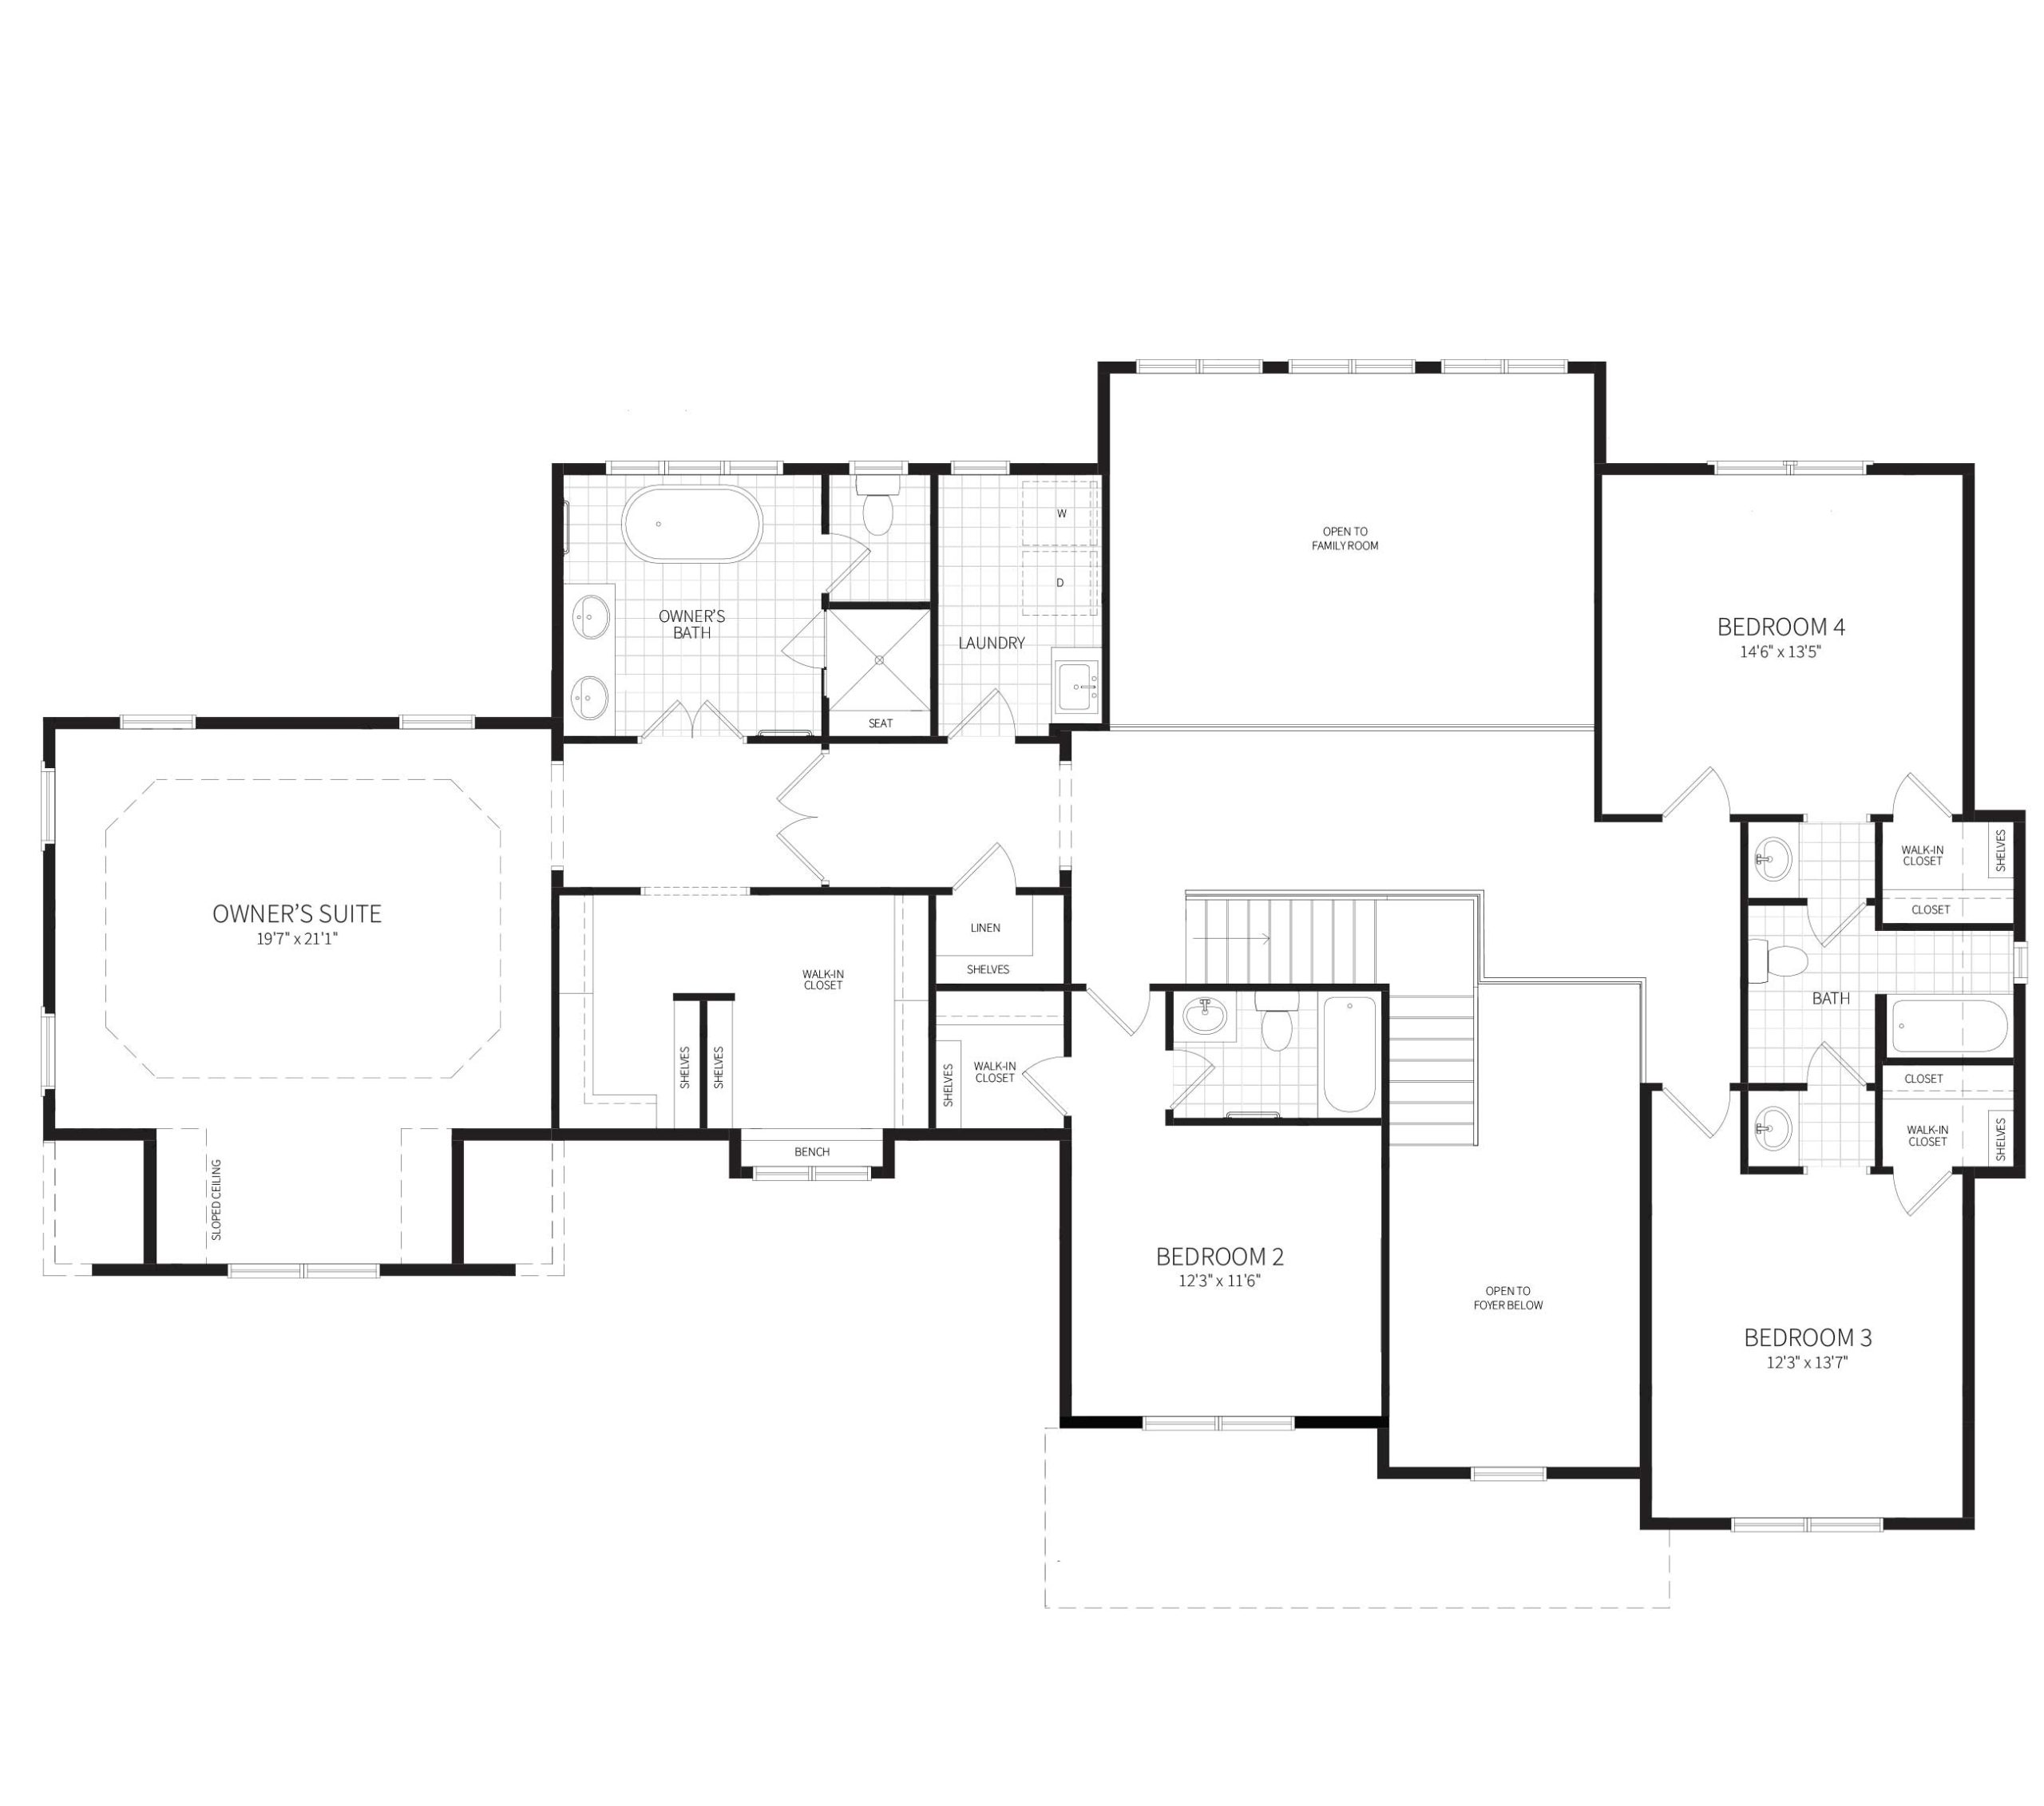 The second floor plan of the Avenel model, featuring an expansive Owner's Suite and three additional bedrooms.